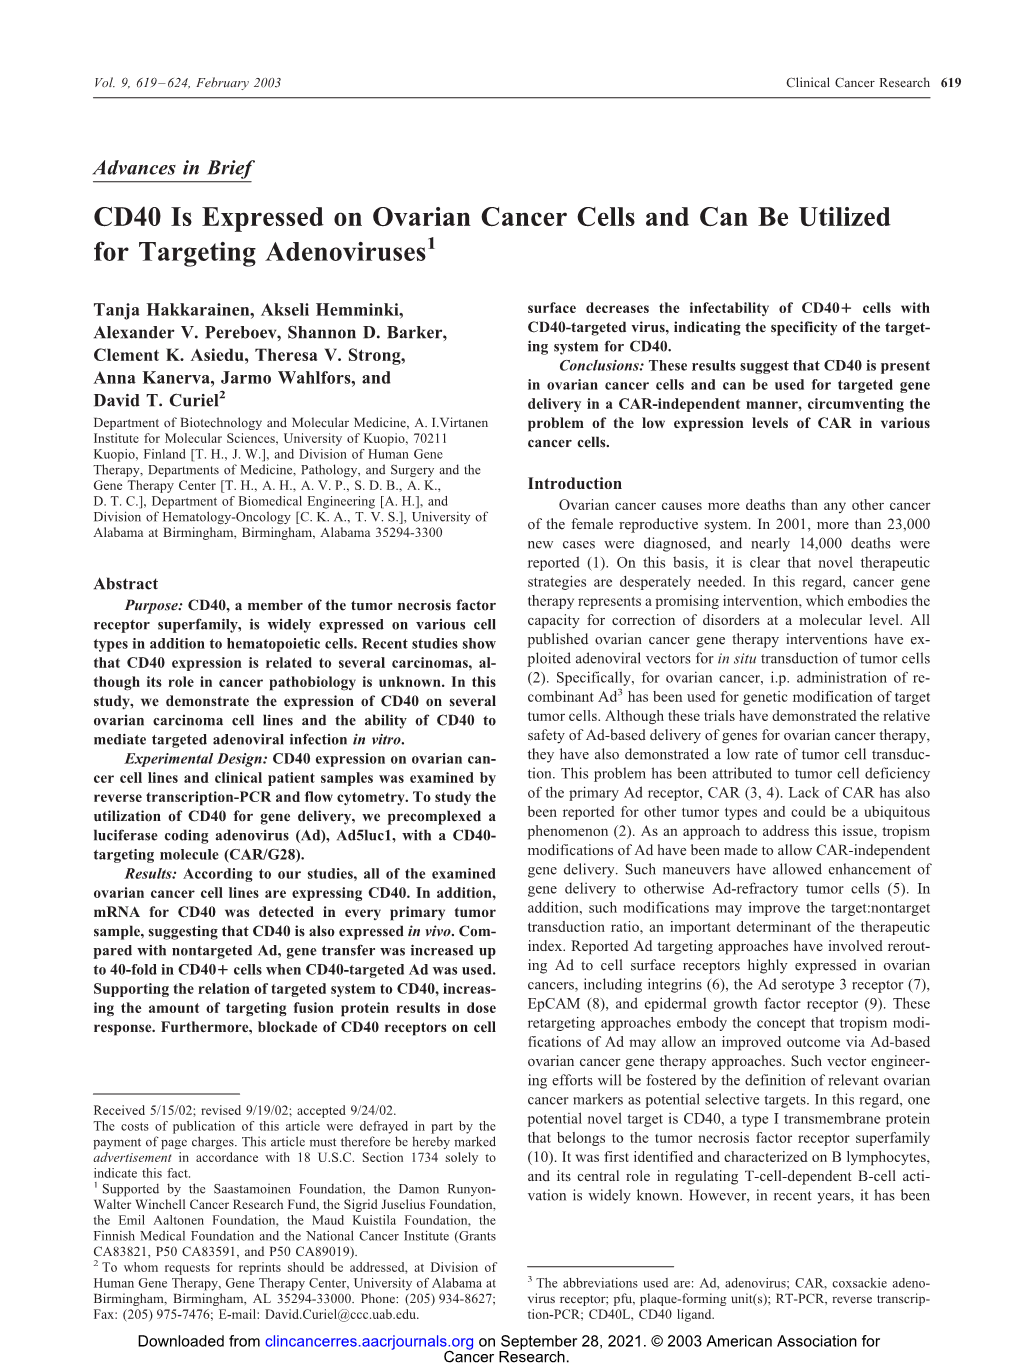 CD40 Is Expressed on Ovarian Cancer Cells and Can Be Utilized for Targeting Adenoviruses1